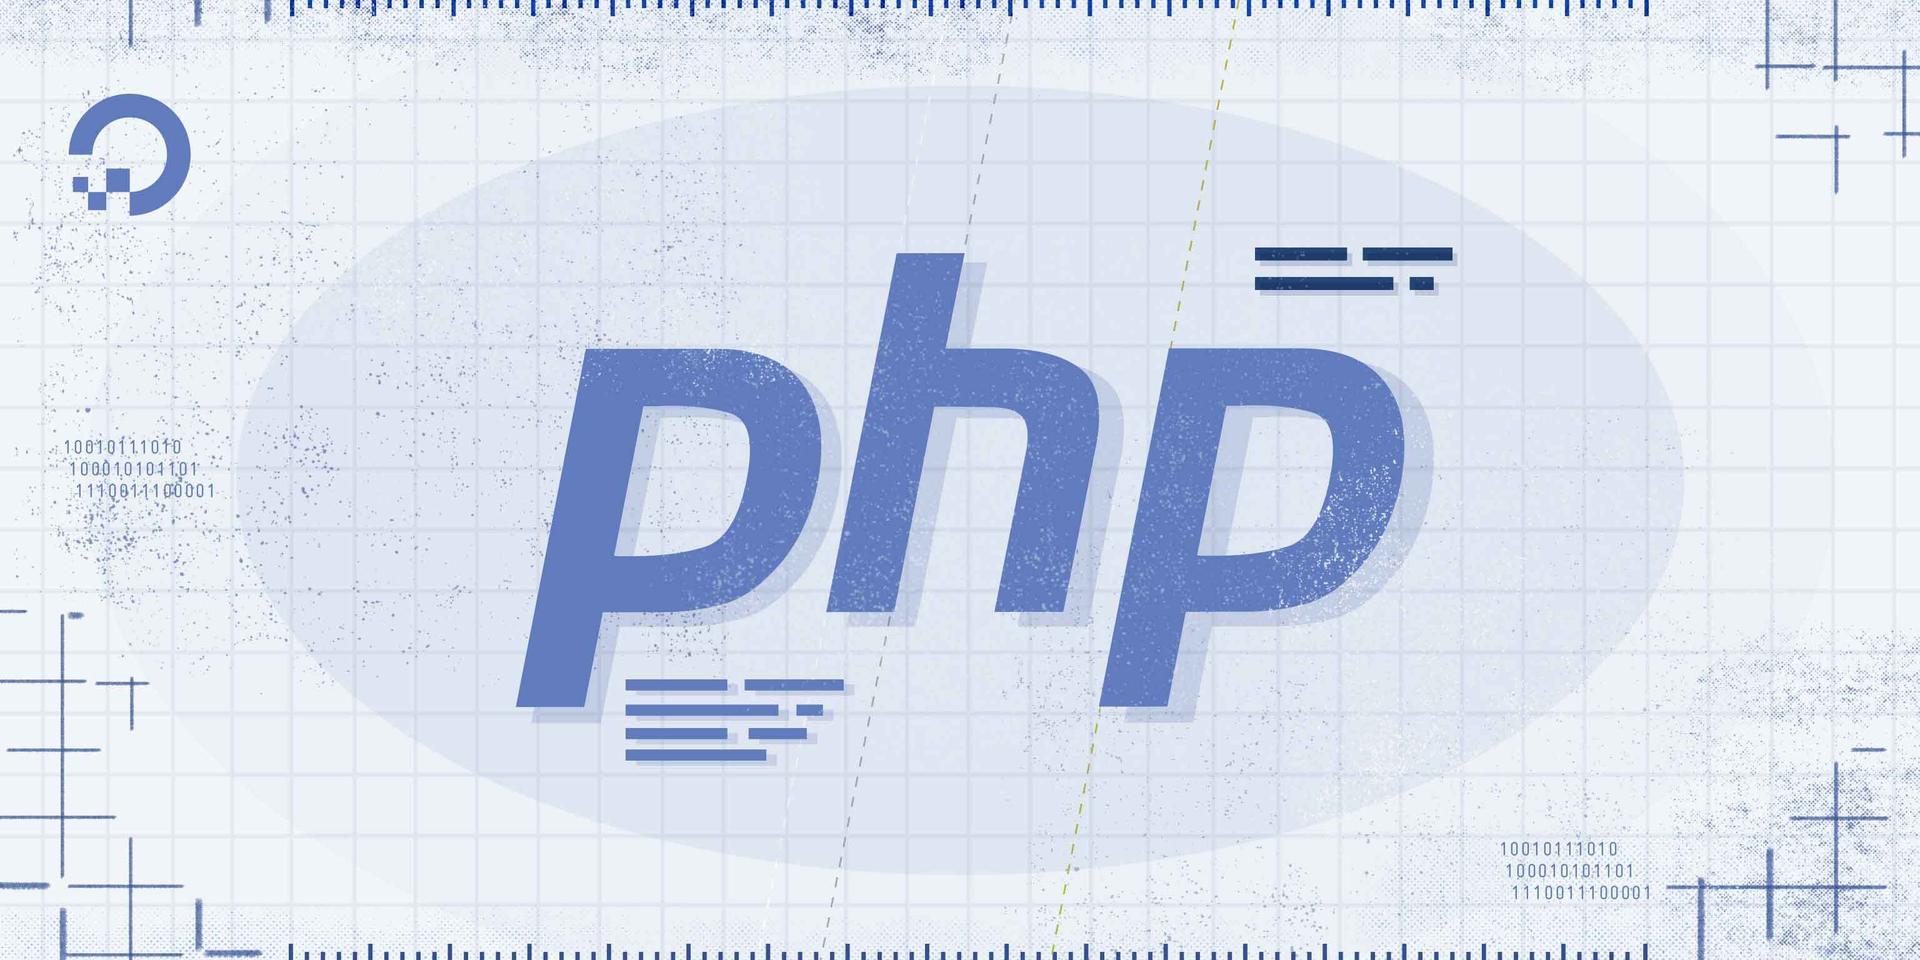 How To Work with Strings in PHP